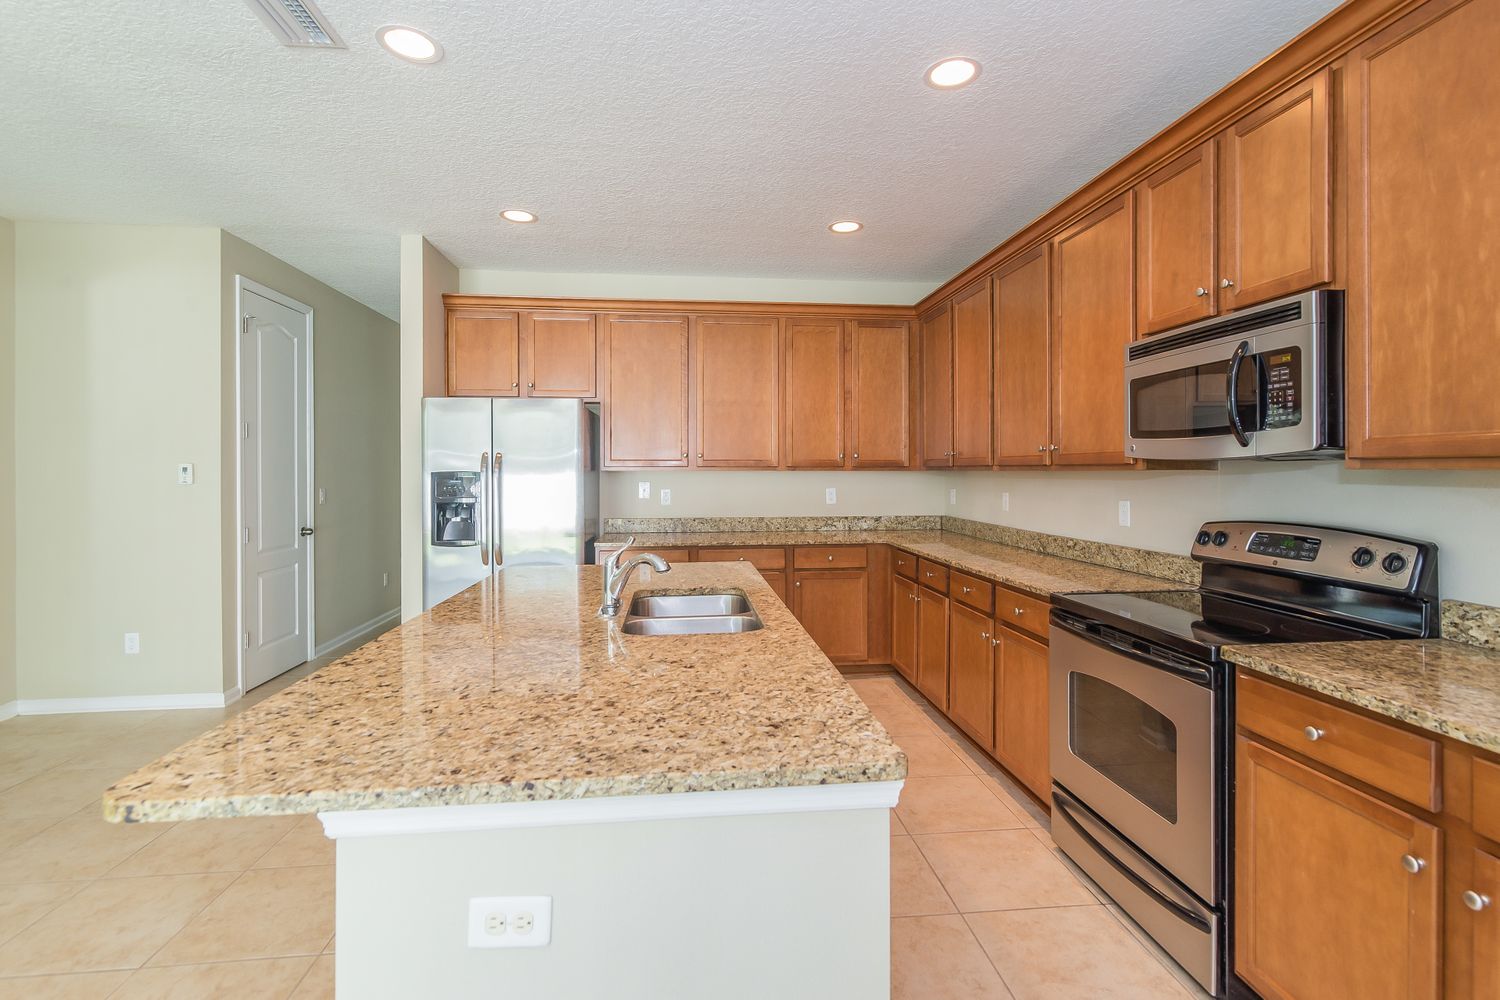 Spacious kitchen with an island, stainless steel appliances, and recessed lighting at Invitation Homes Jacksonville.